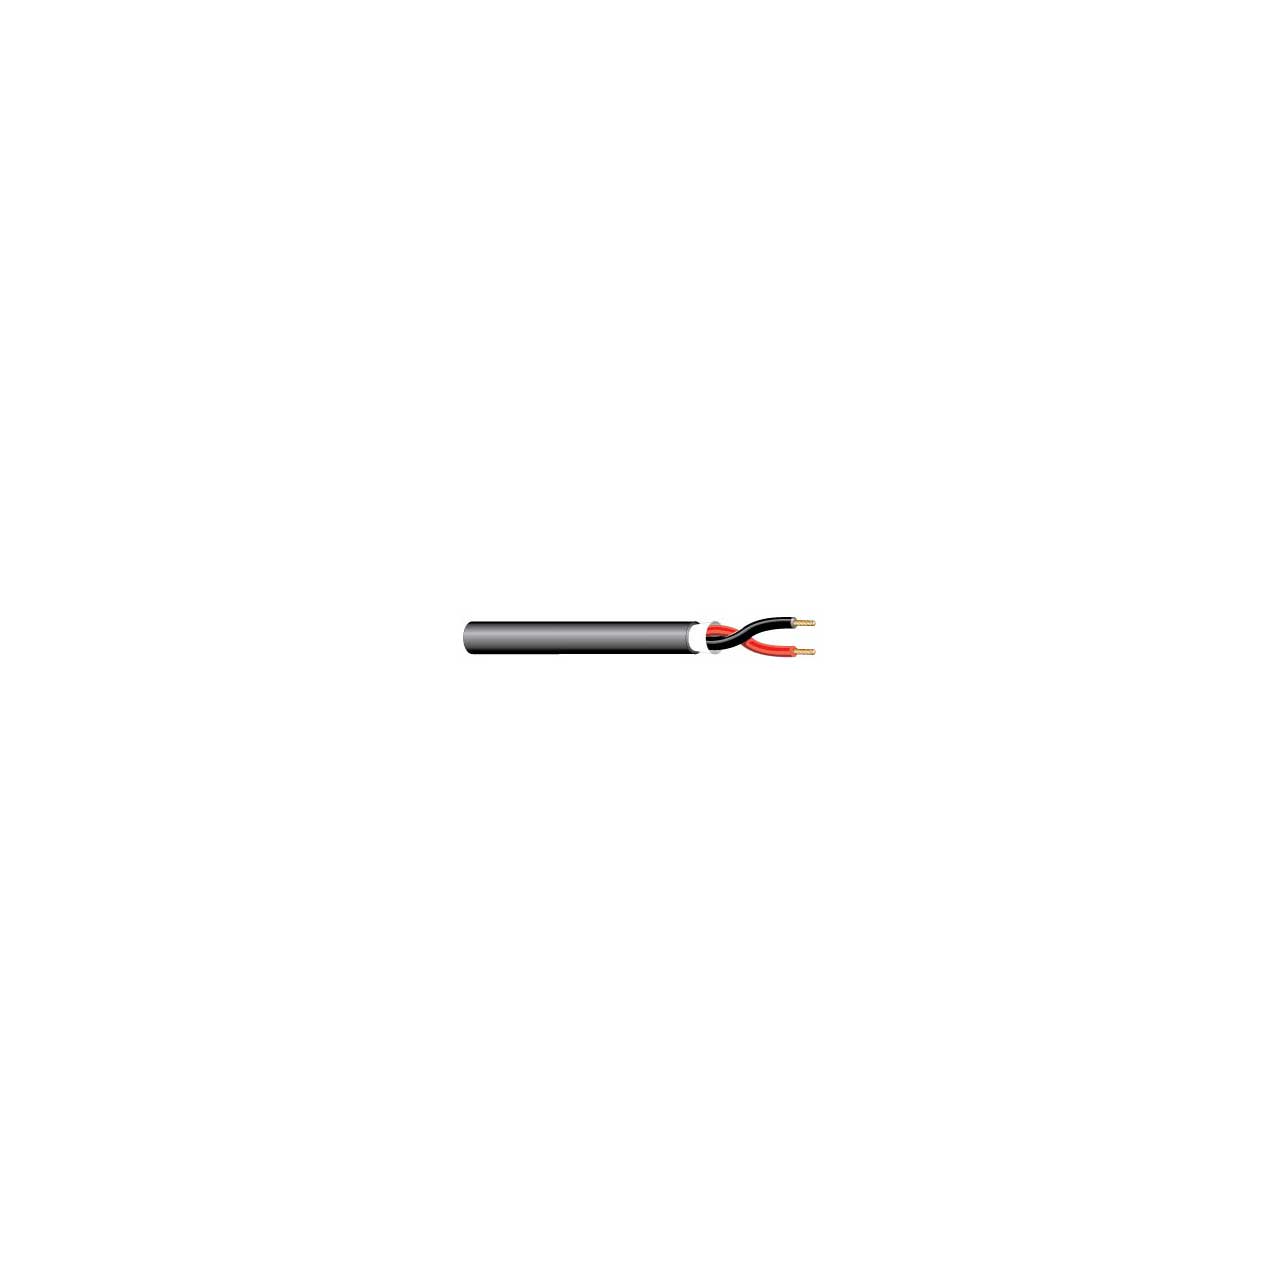 West Penn AQC227GY1000 2 Conductor - 12AWG - Unshielded Aquaseal CL3 / FPL Rated Alarm / Control Cable - Gray - 1000 Foot WP-AQC227-1000GY